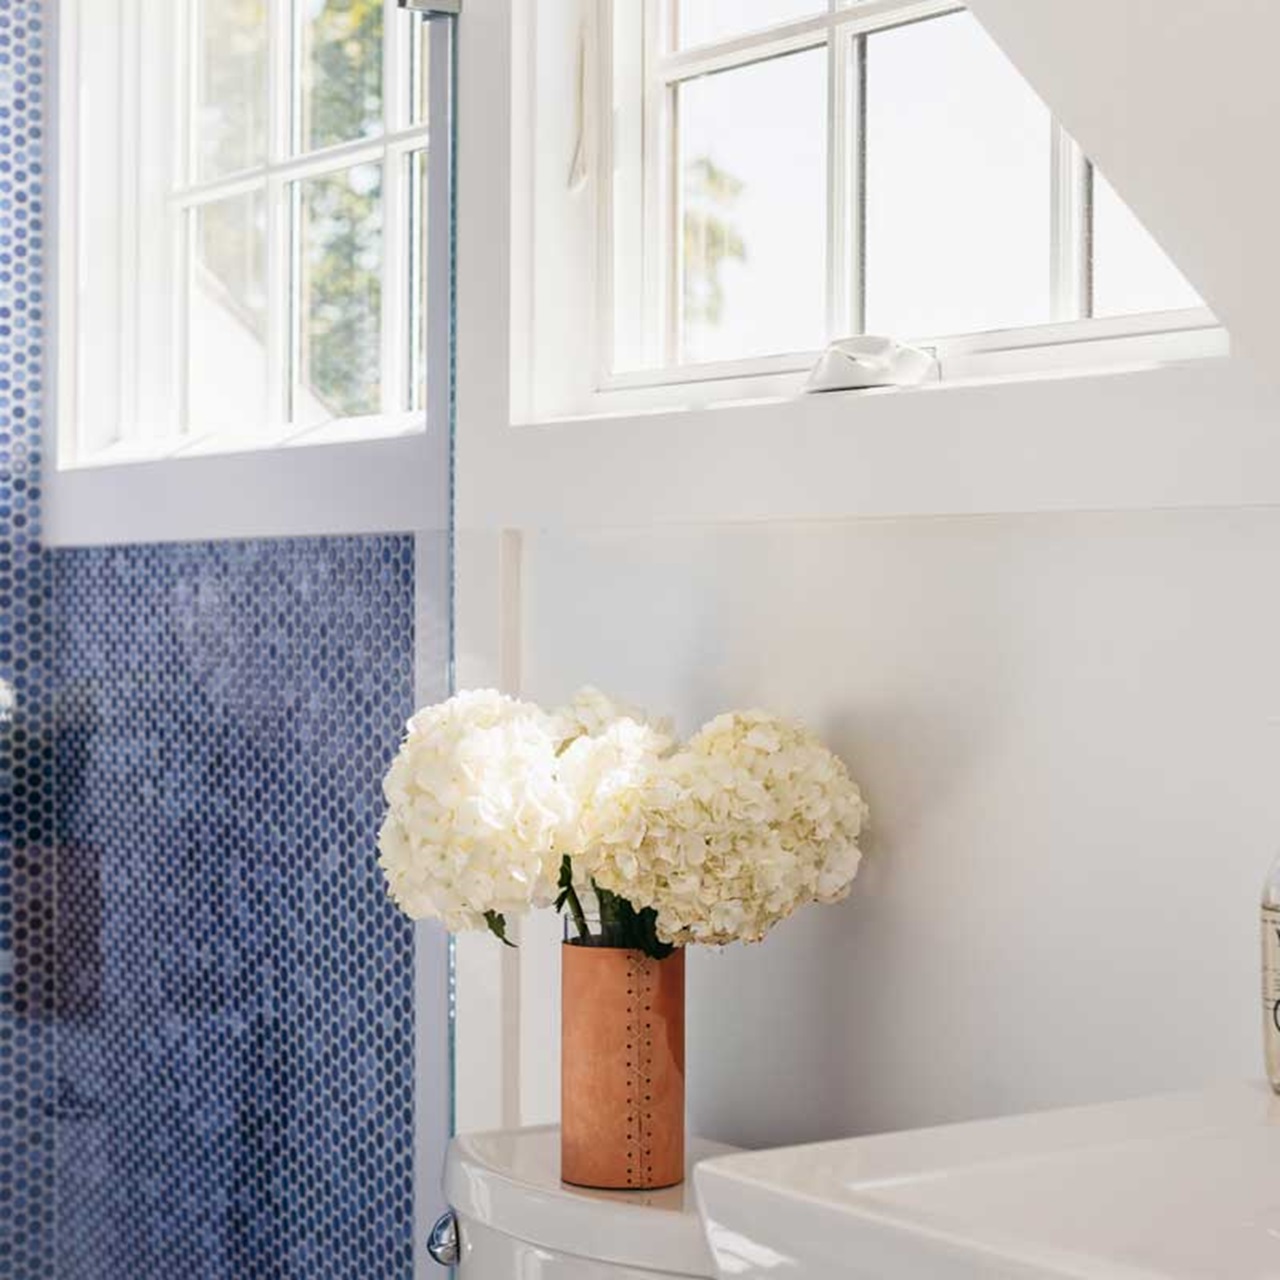 Bathroom with vase of flowers in front of two white awning windows